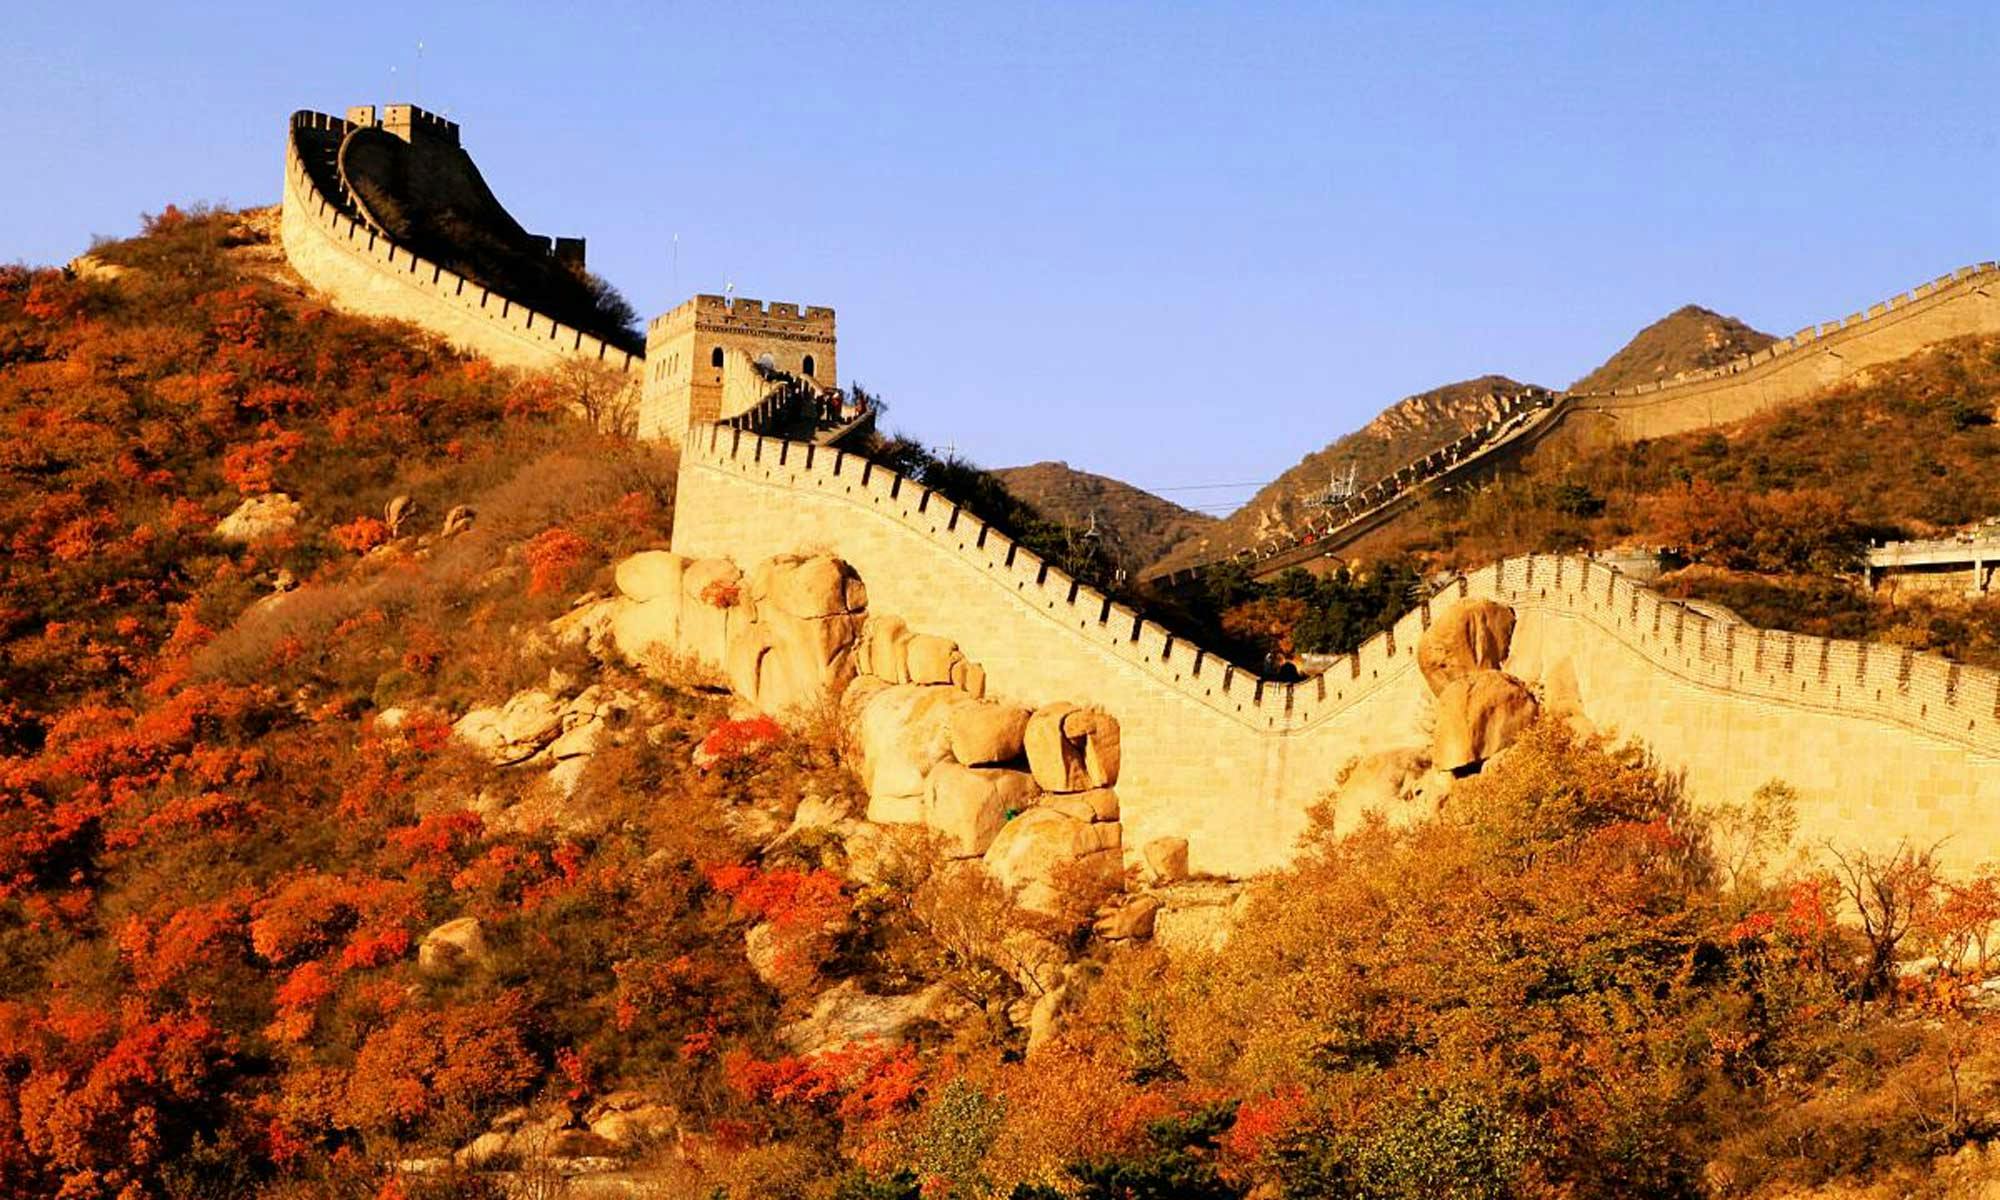 All-inclusive Beijing classic tour of Badaling Great Wall and customizable sites